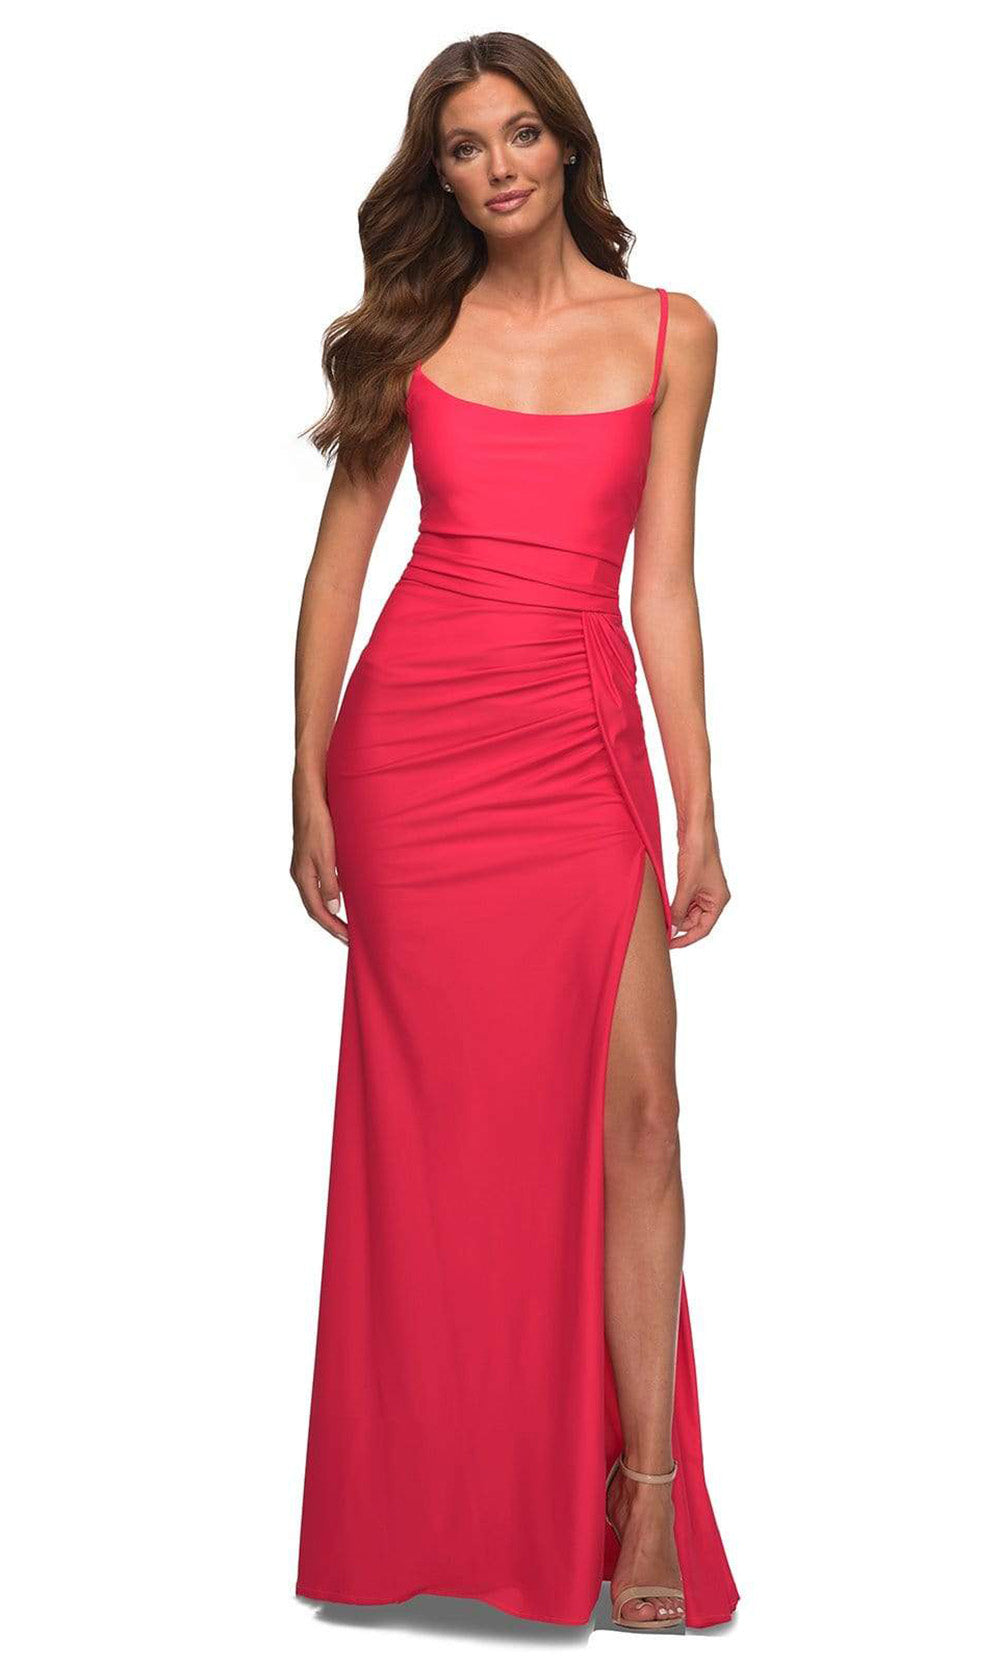 La Femme - 30470 Strappy Lace Back Slit Gown In Red